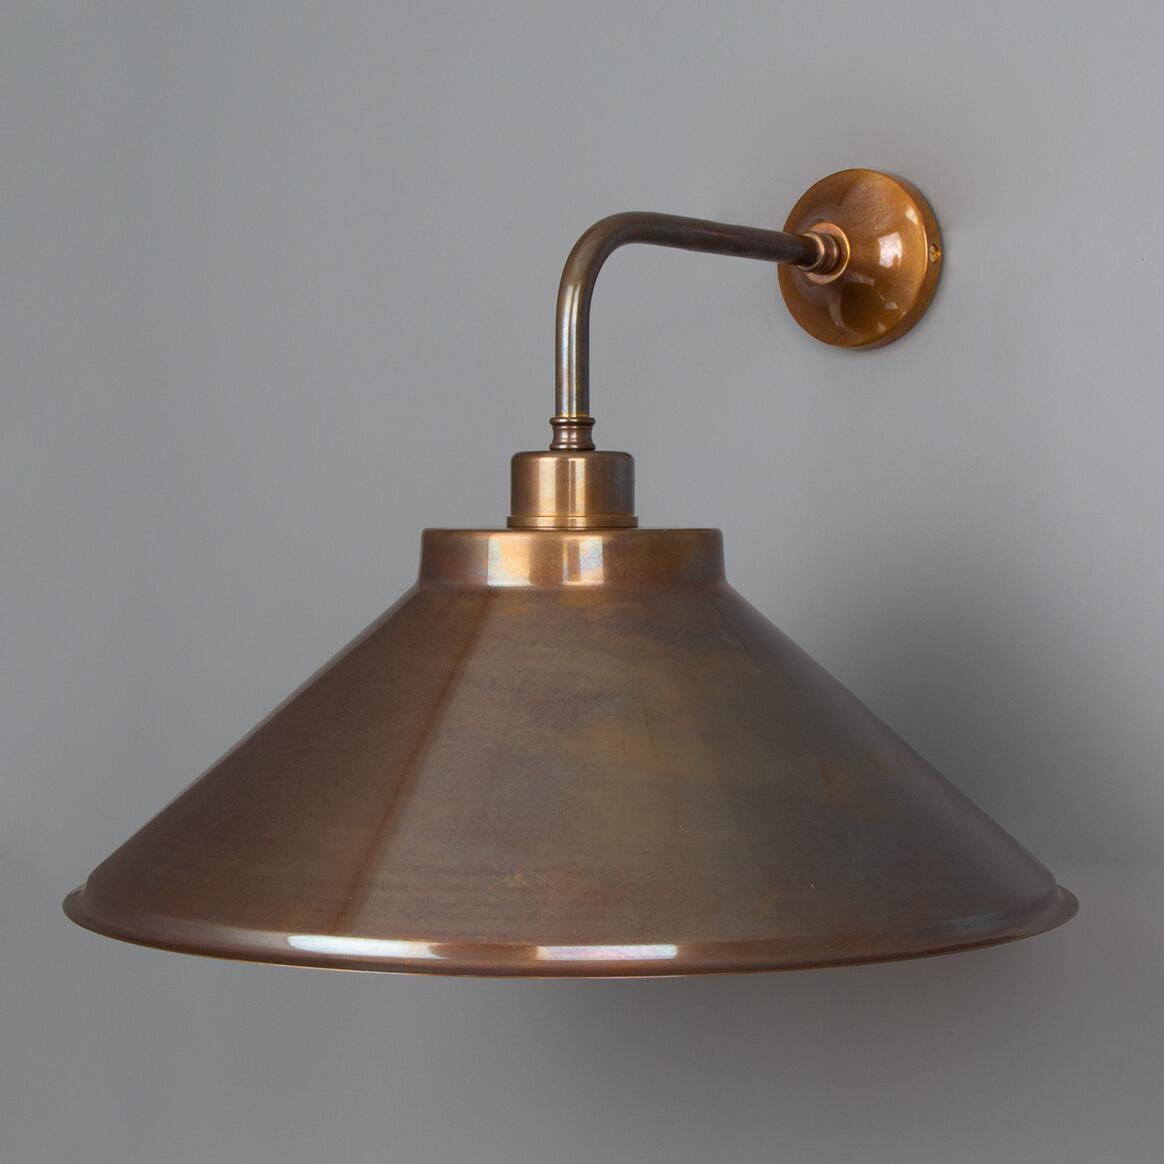 Rio Vintage Wall Light with Brass Cone Shade 38cm main product image